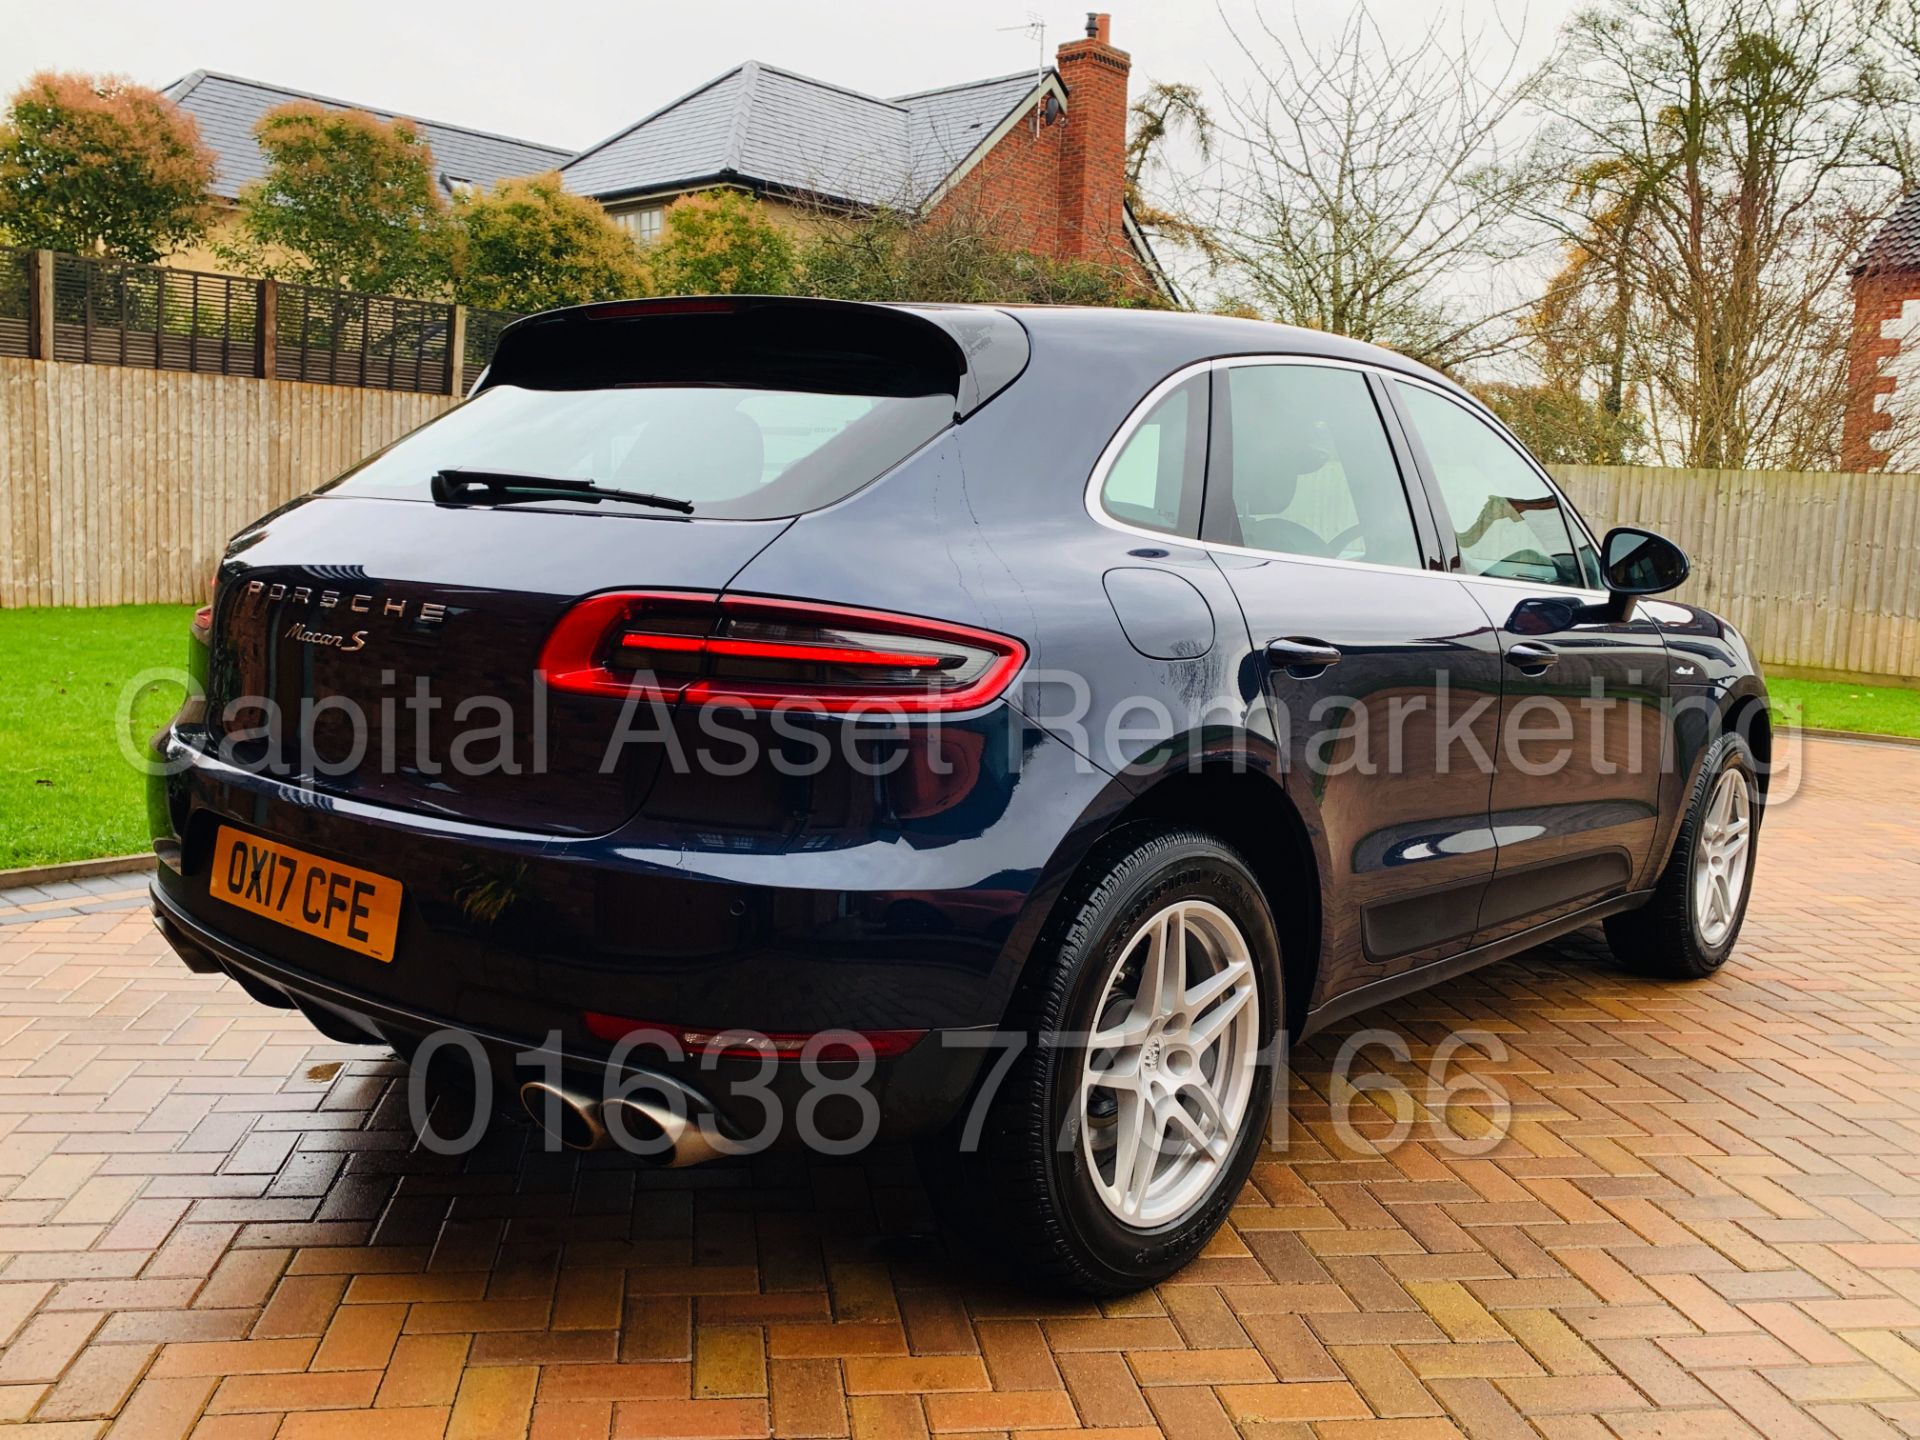 On Sale PORSCHE MACAN S *SPORTS SUV* (2017 - NEW MODEL) '3.0 V6 DIESEL - 258 BHP - PDK AUTO' * WOW* - Image 12 of 71